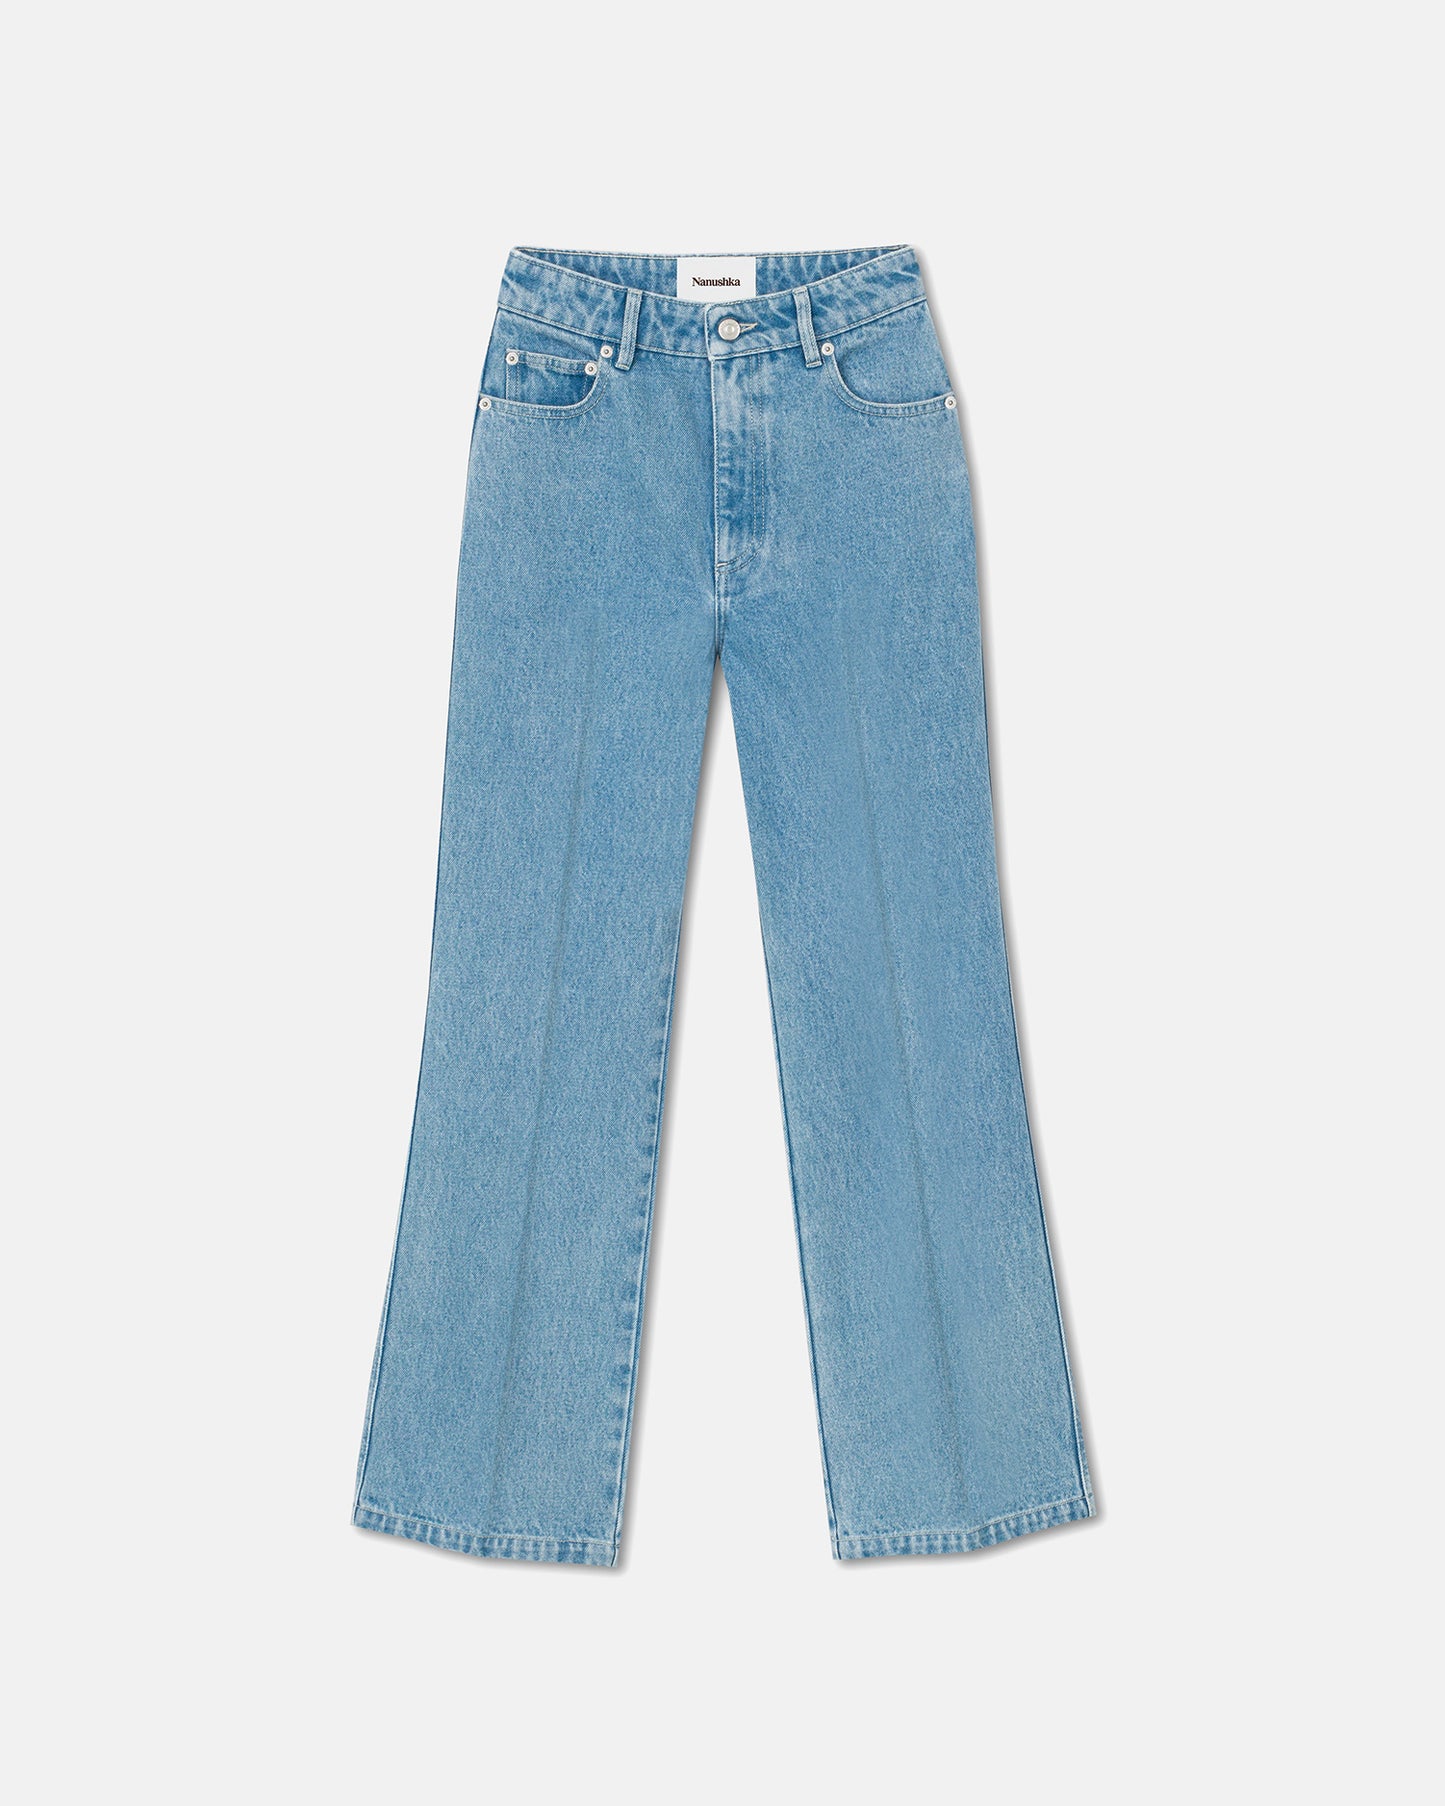 Zoey - Cropped Kick-Flare Jeans - Eco Light Wash